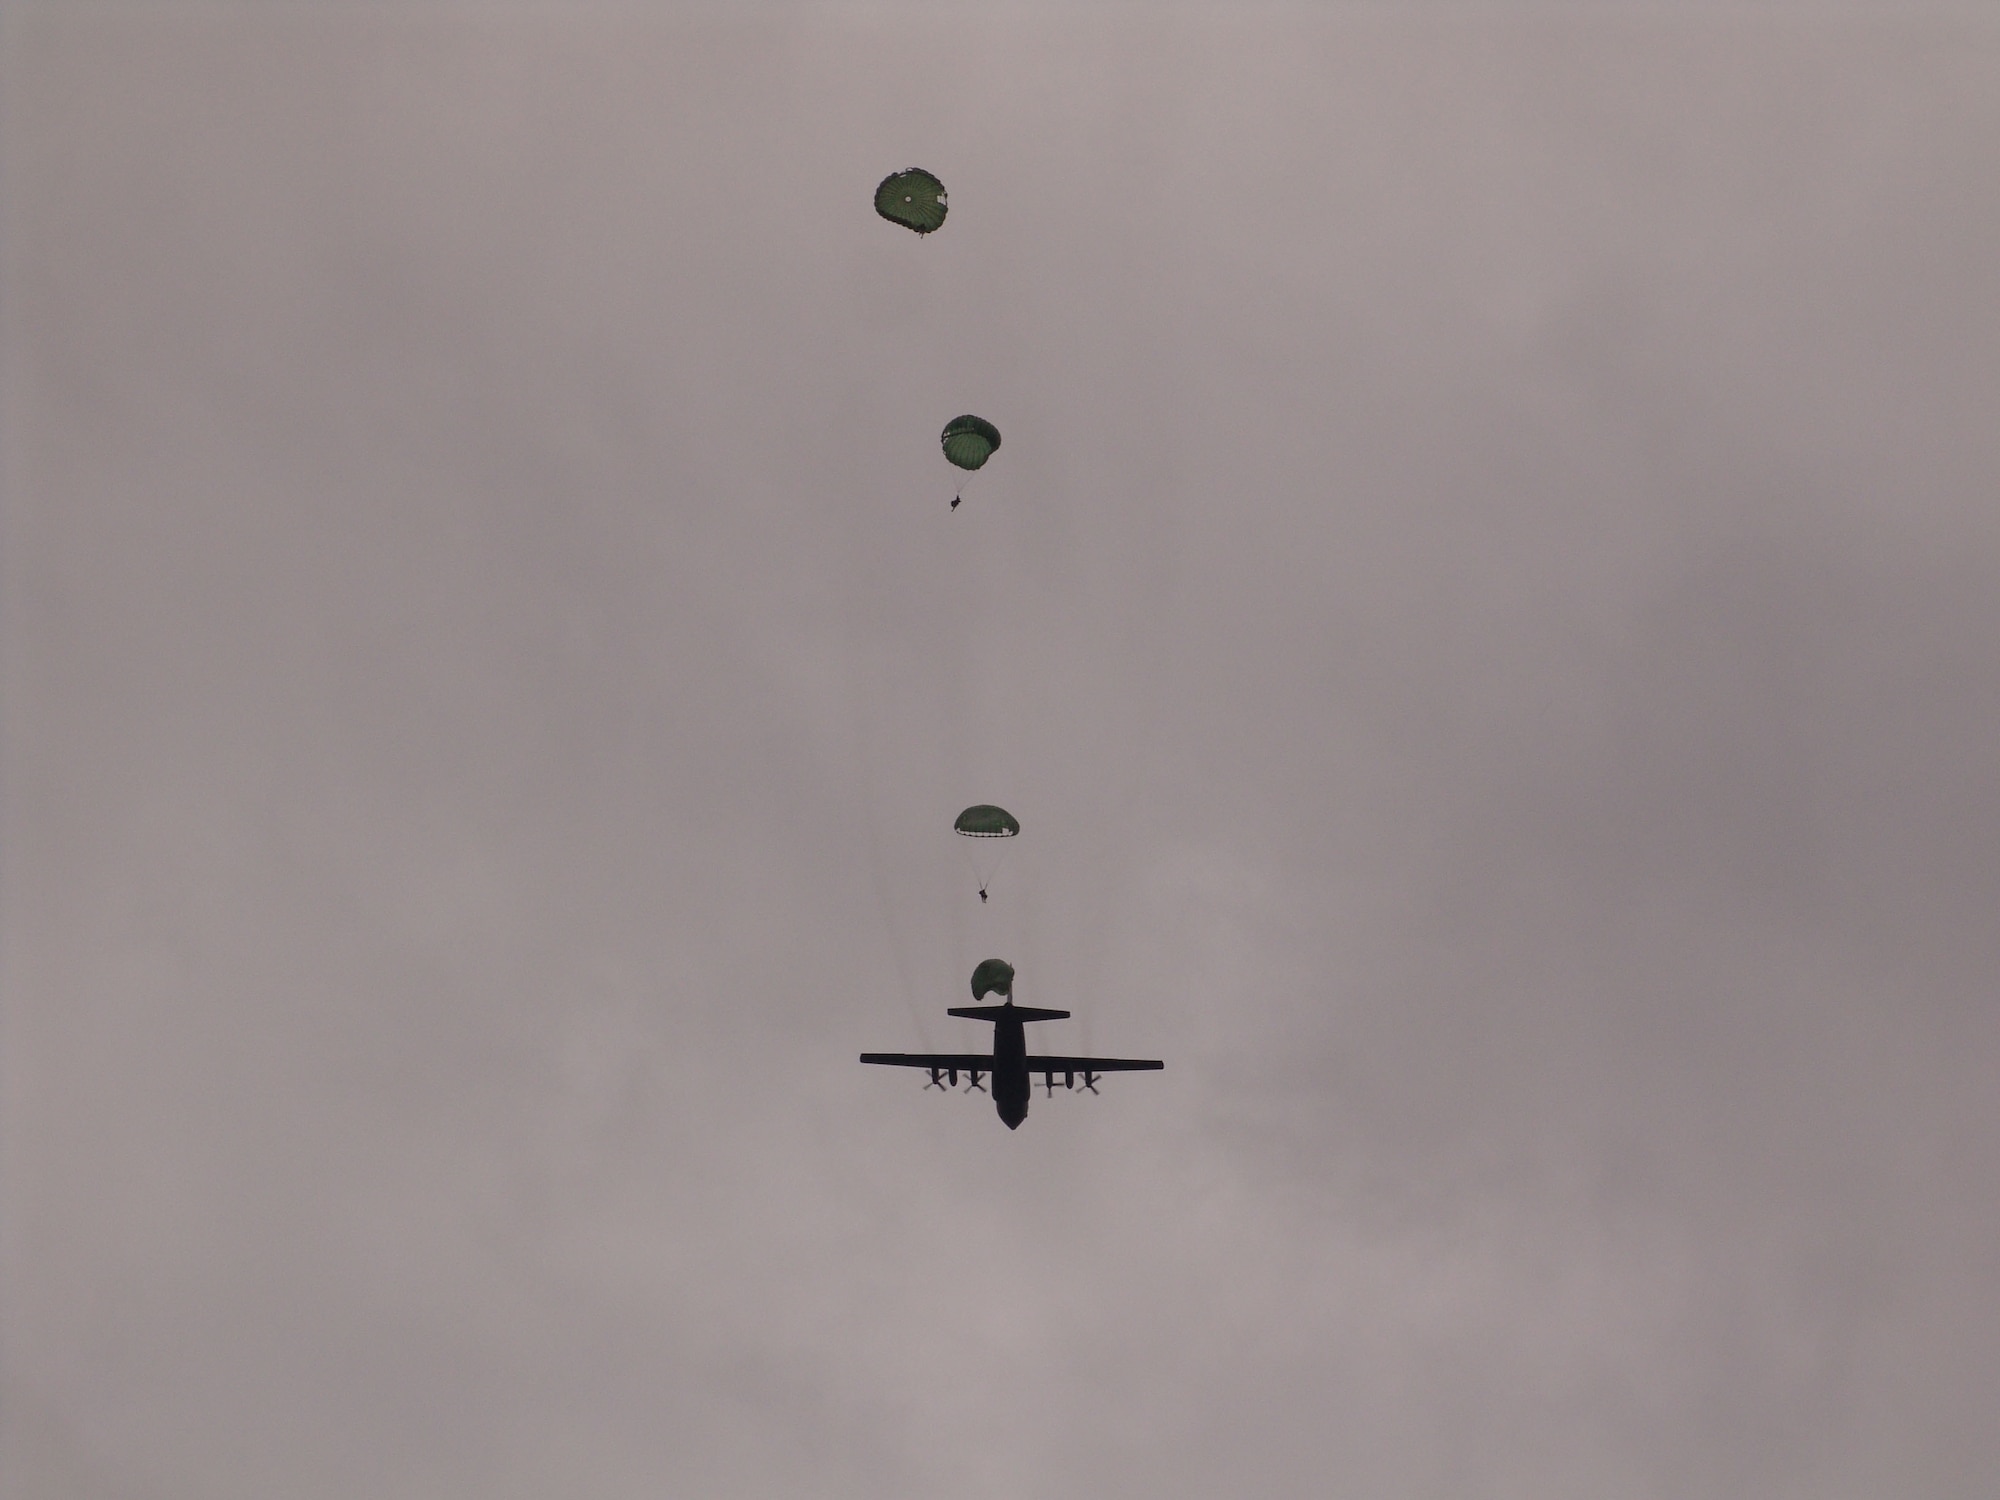 Air Reserve paratroopers from the 861st Quartermaster Company in Nashville, Tenn., jump out of a Tennessee Air National Guard C-130 Hercules over Arnold Air Force Base, Tenn., April 1 during a mock-deployment exercise.  (Photo by Claude Morse)